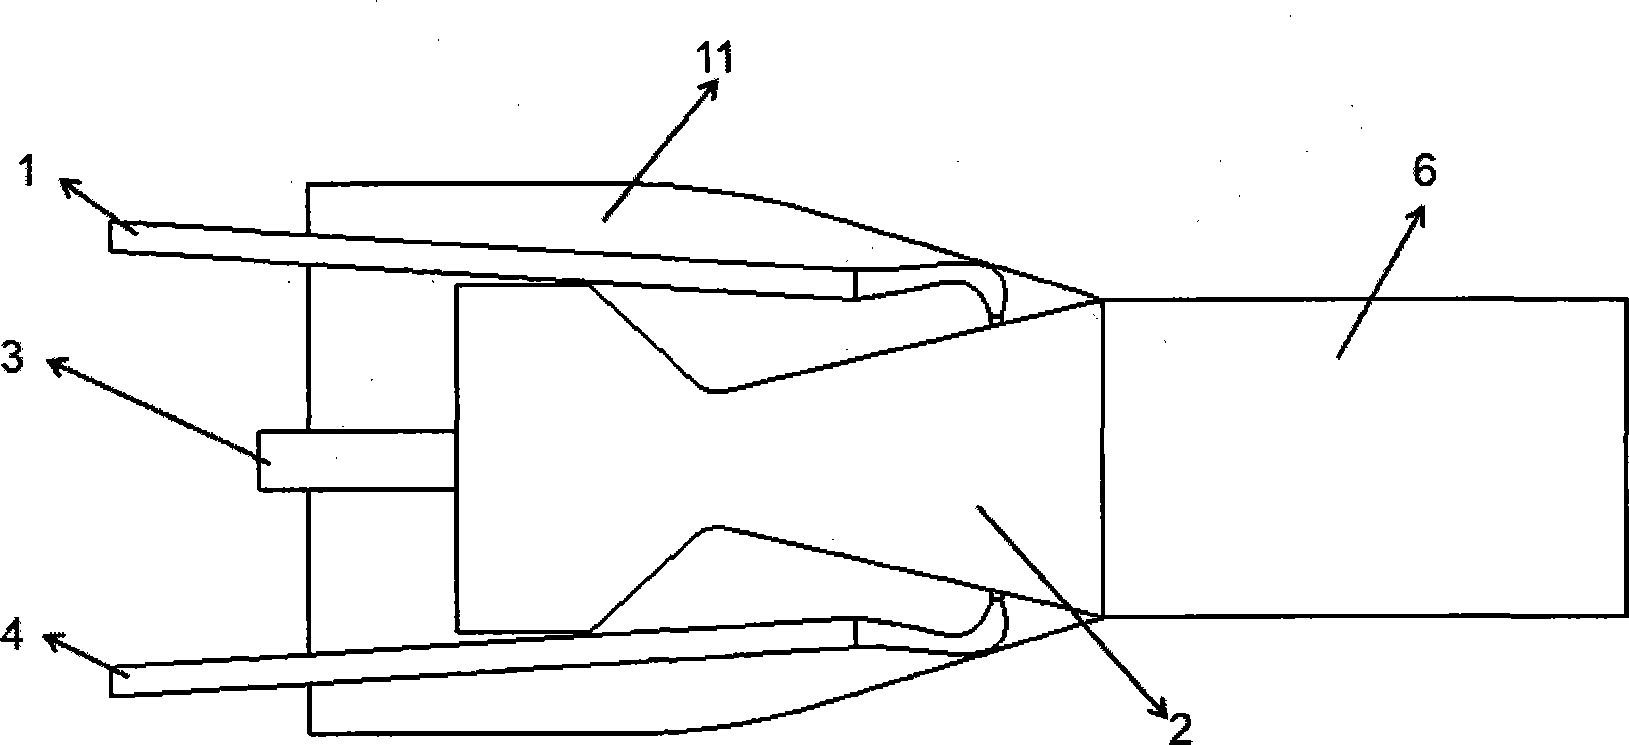 Multi-axial fixed geometrical pneumatic vectoring nozzle structure